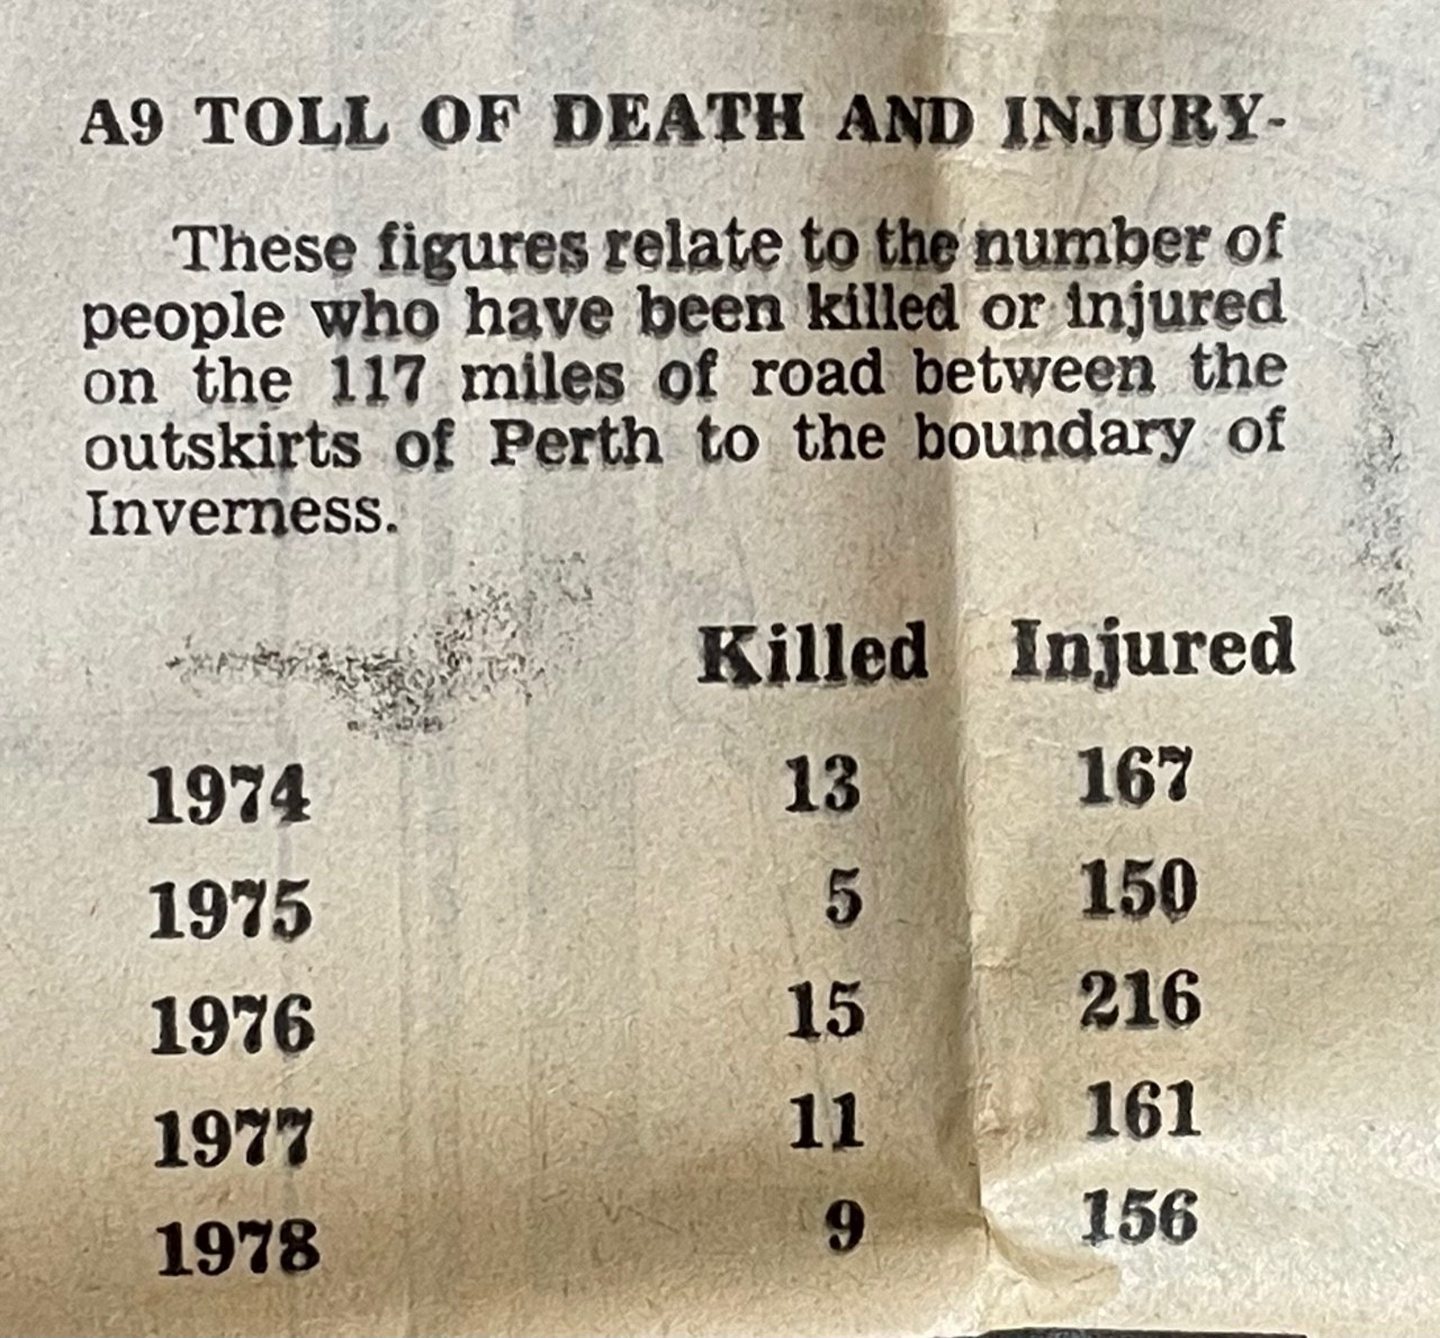 The death and injury toll of the A9 in the 1970s:74 - 13 killed and 167 injured 75 - 5 killed and 150 injured 76 - 15 killed and 216 injured 77 - 11 killed and 161 Injured 78 - 9 killed and 156 injured